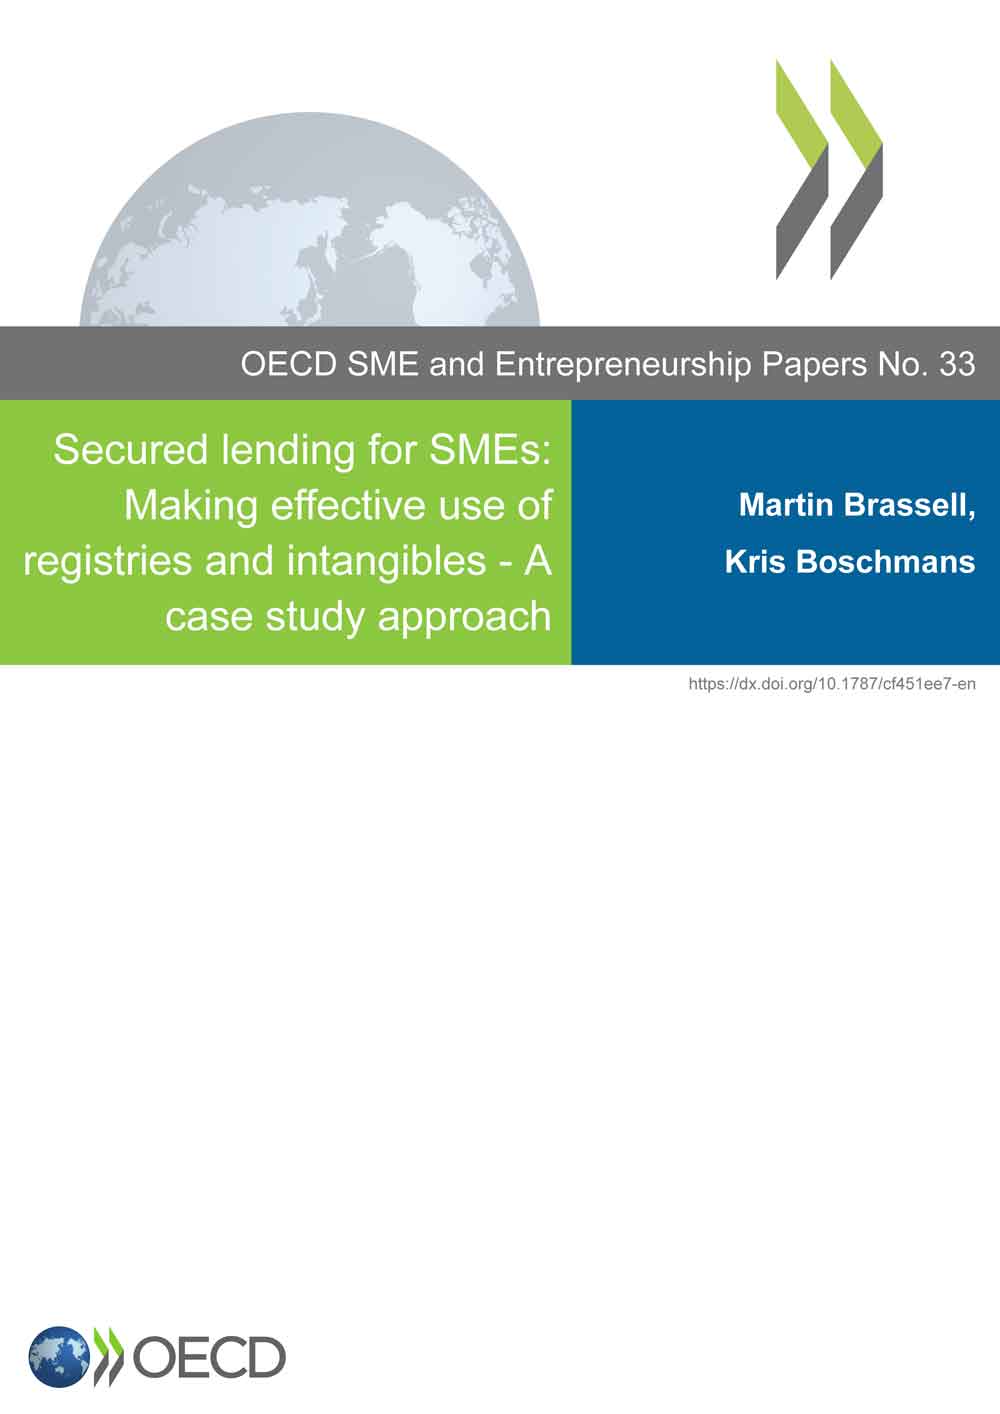 Secured lending for SMEs - making effective use of registries and intangibles - OECD 2022